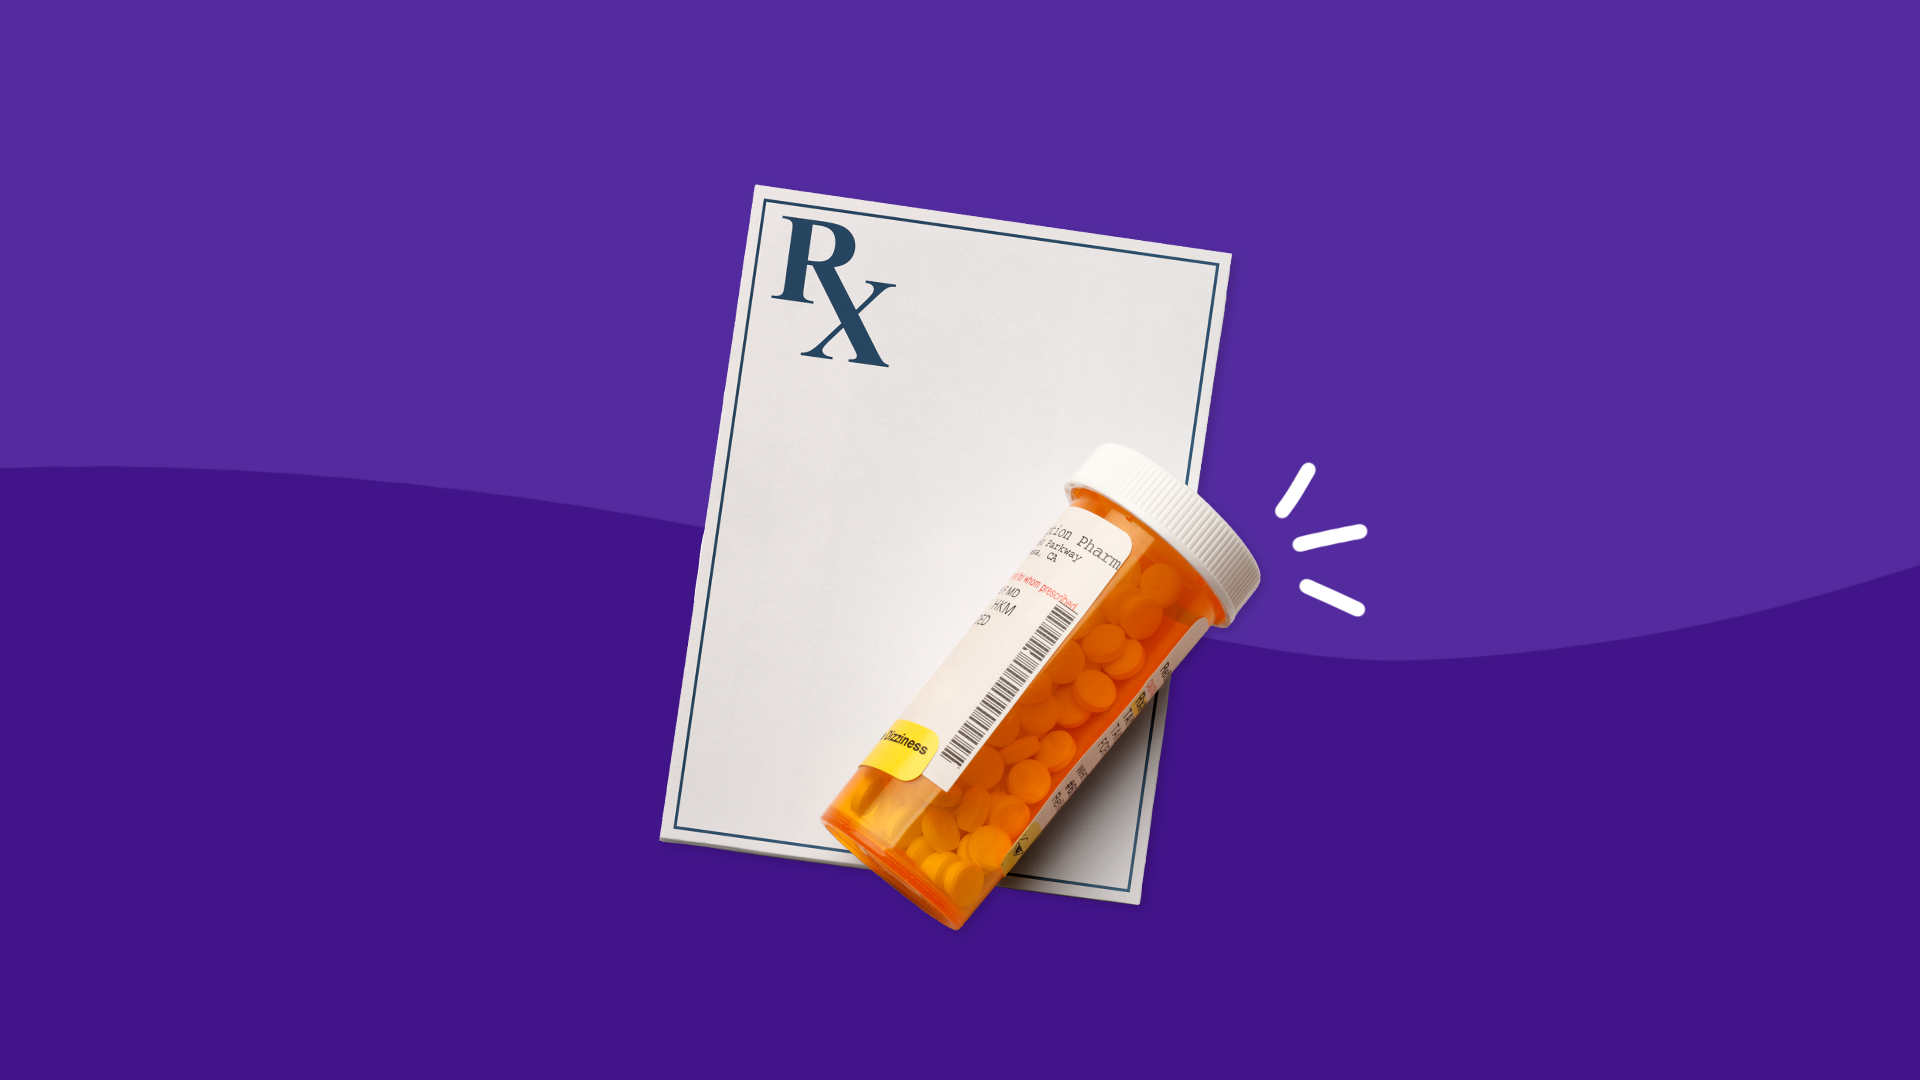 Rx pad with pill bottle: side effects of Klonopin